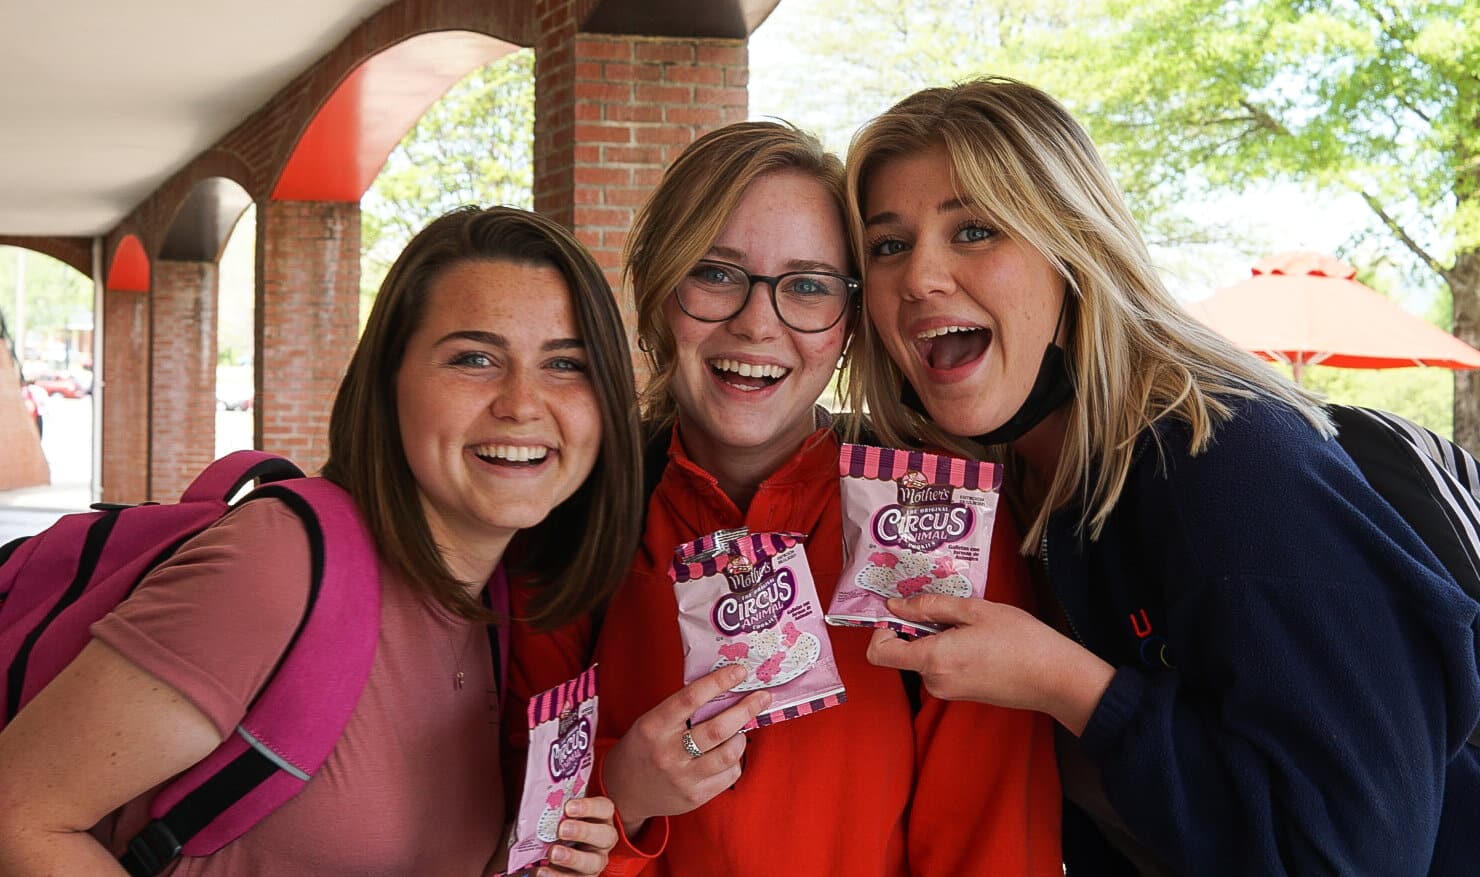 Sophomore elementary education majors Tara Madeira and Ruth Evans pose with junior business administration major Jordan Pracht after getting their free snacks.